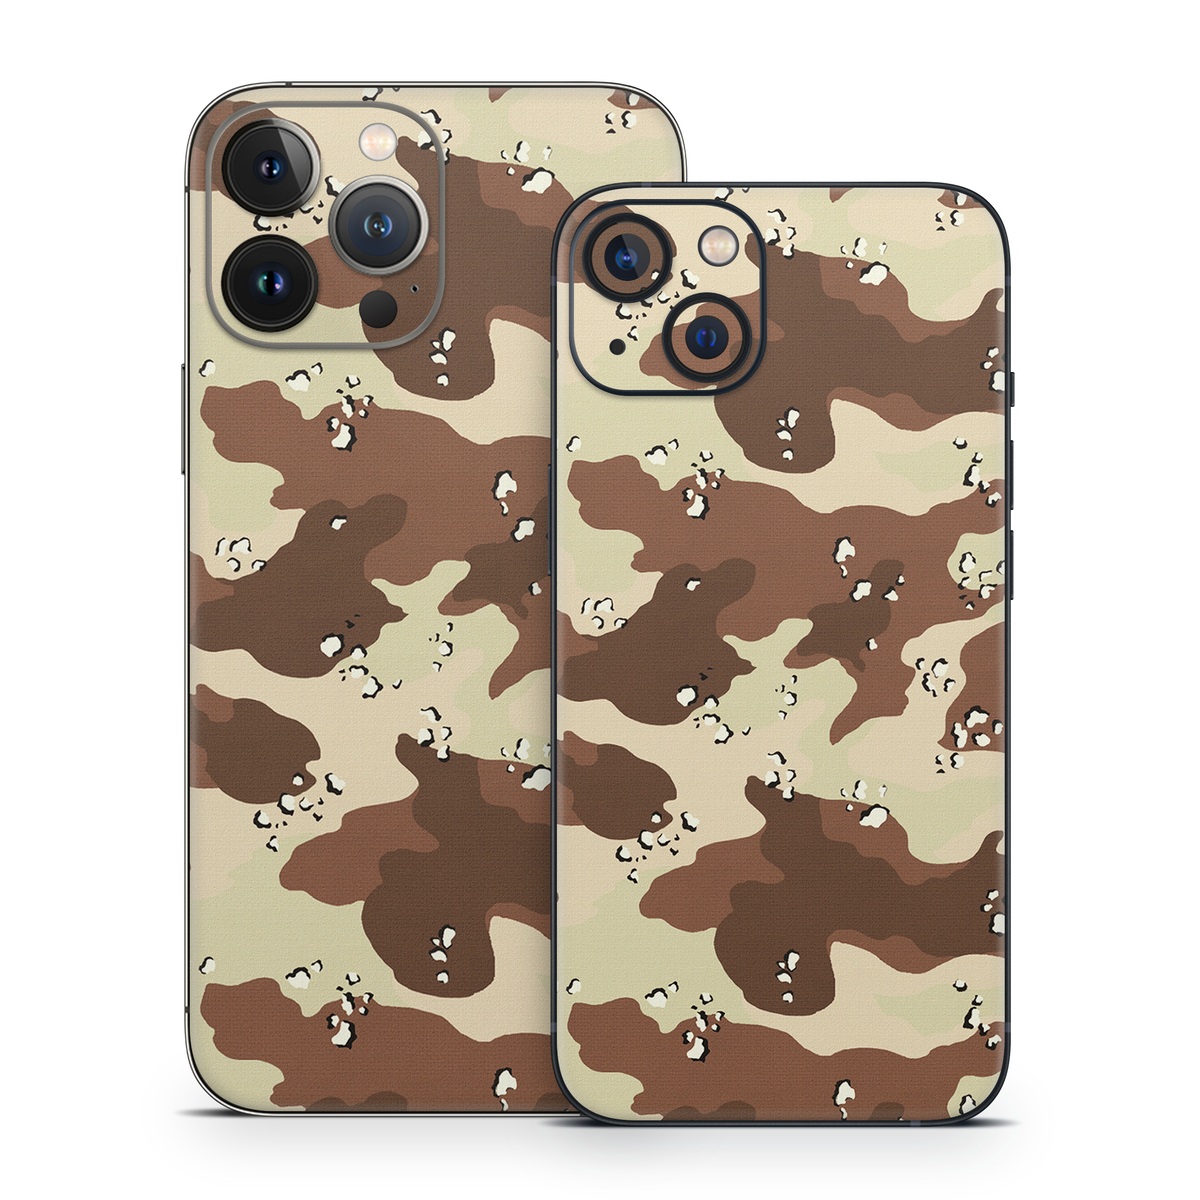 iPhone 13 Series Skin design of Military camouflage, Brown, Pattern, Design, Camouflage, Textile, Beige, Illustration, Uniform, Metal, with gray, red, black, green colors